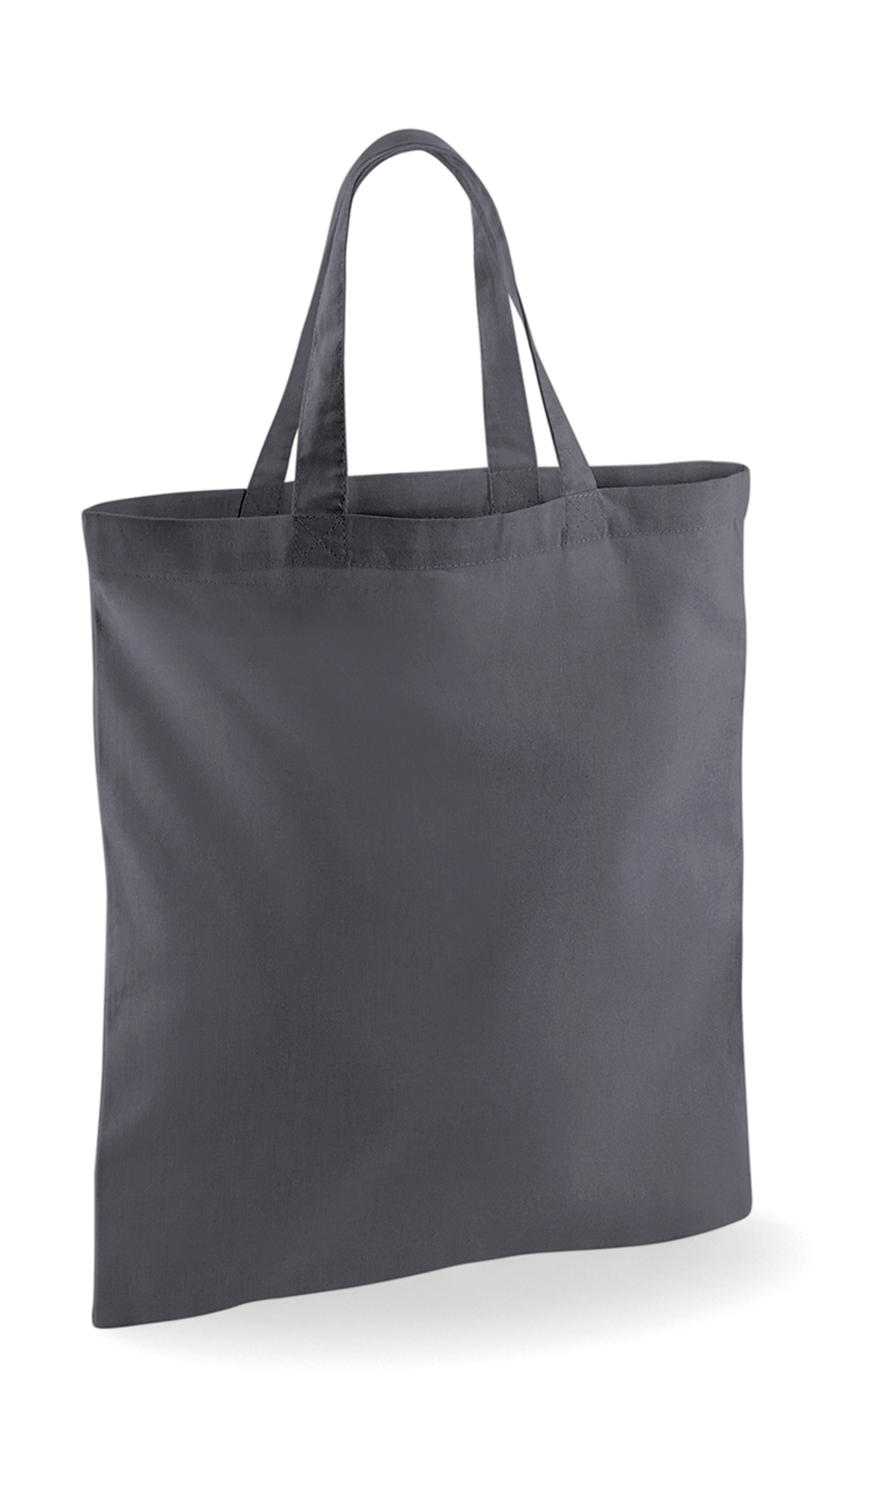  Bag for Life SH in Farbe Graphite Grey